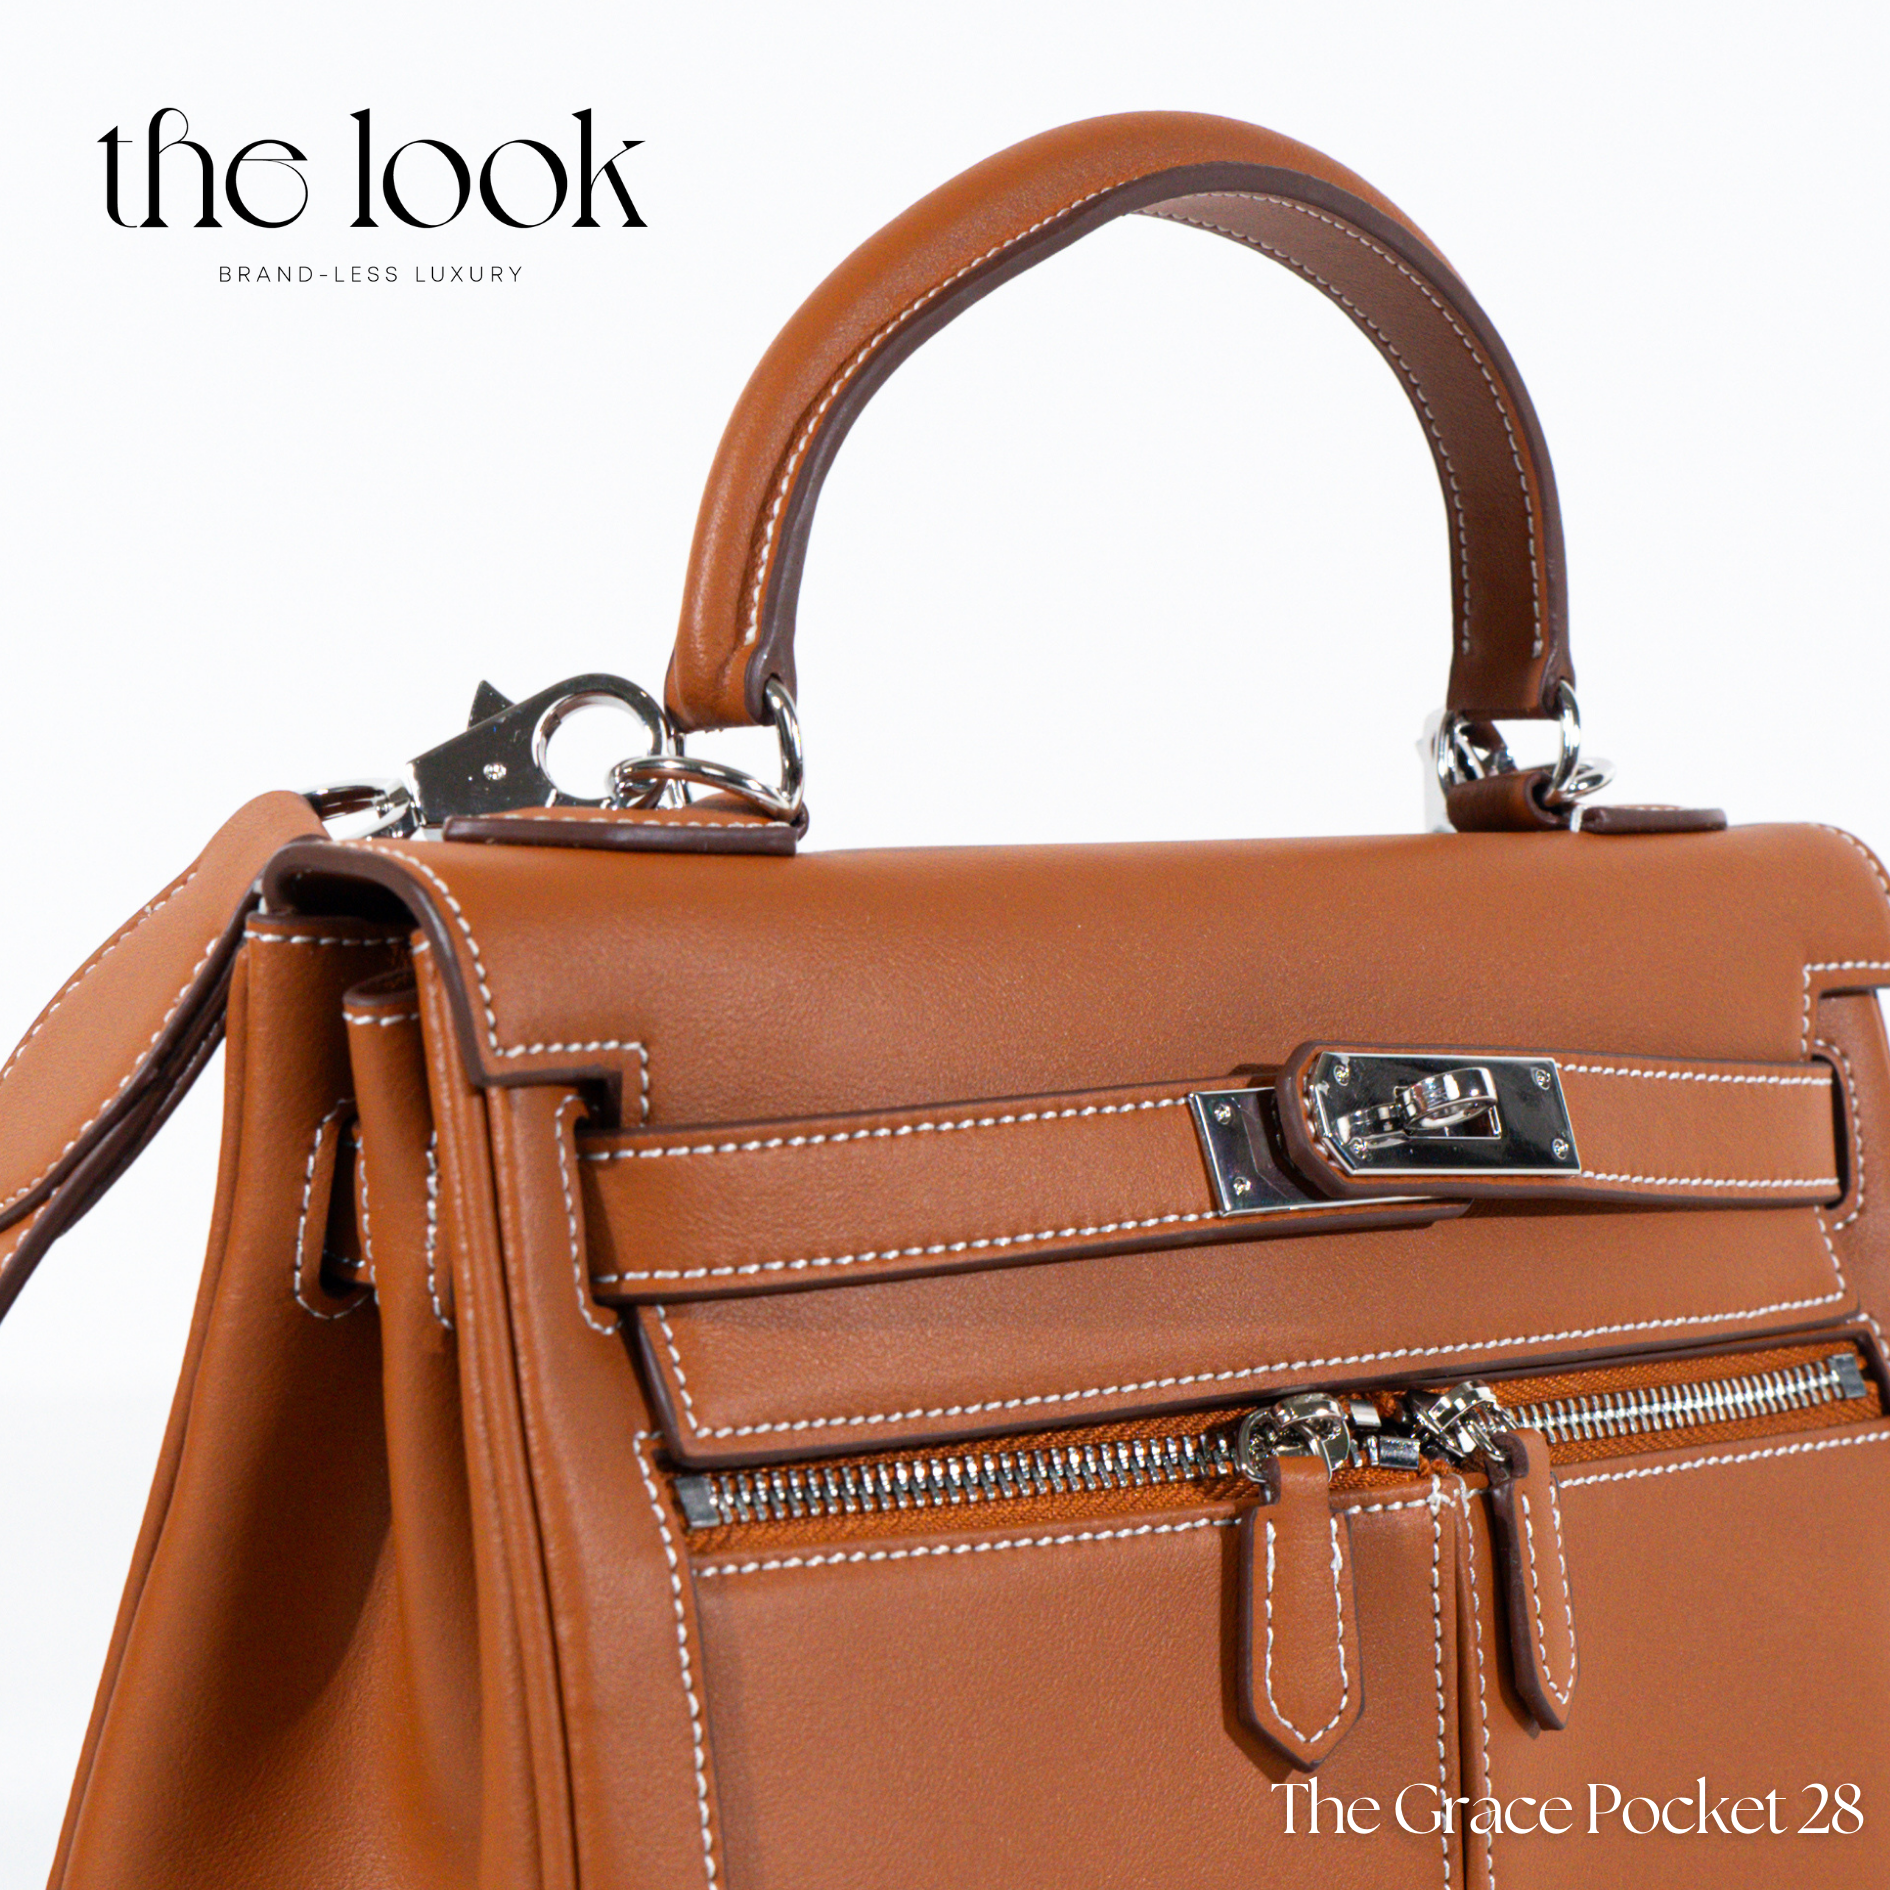 The Grace 28 Pocket Swift Leather Gold Tan SHW by The Look